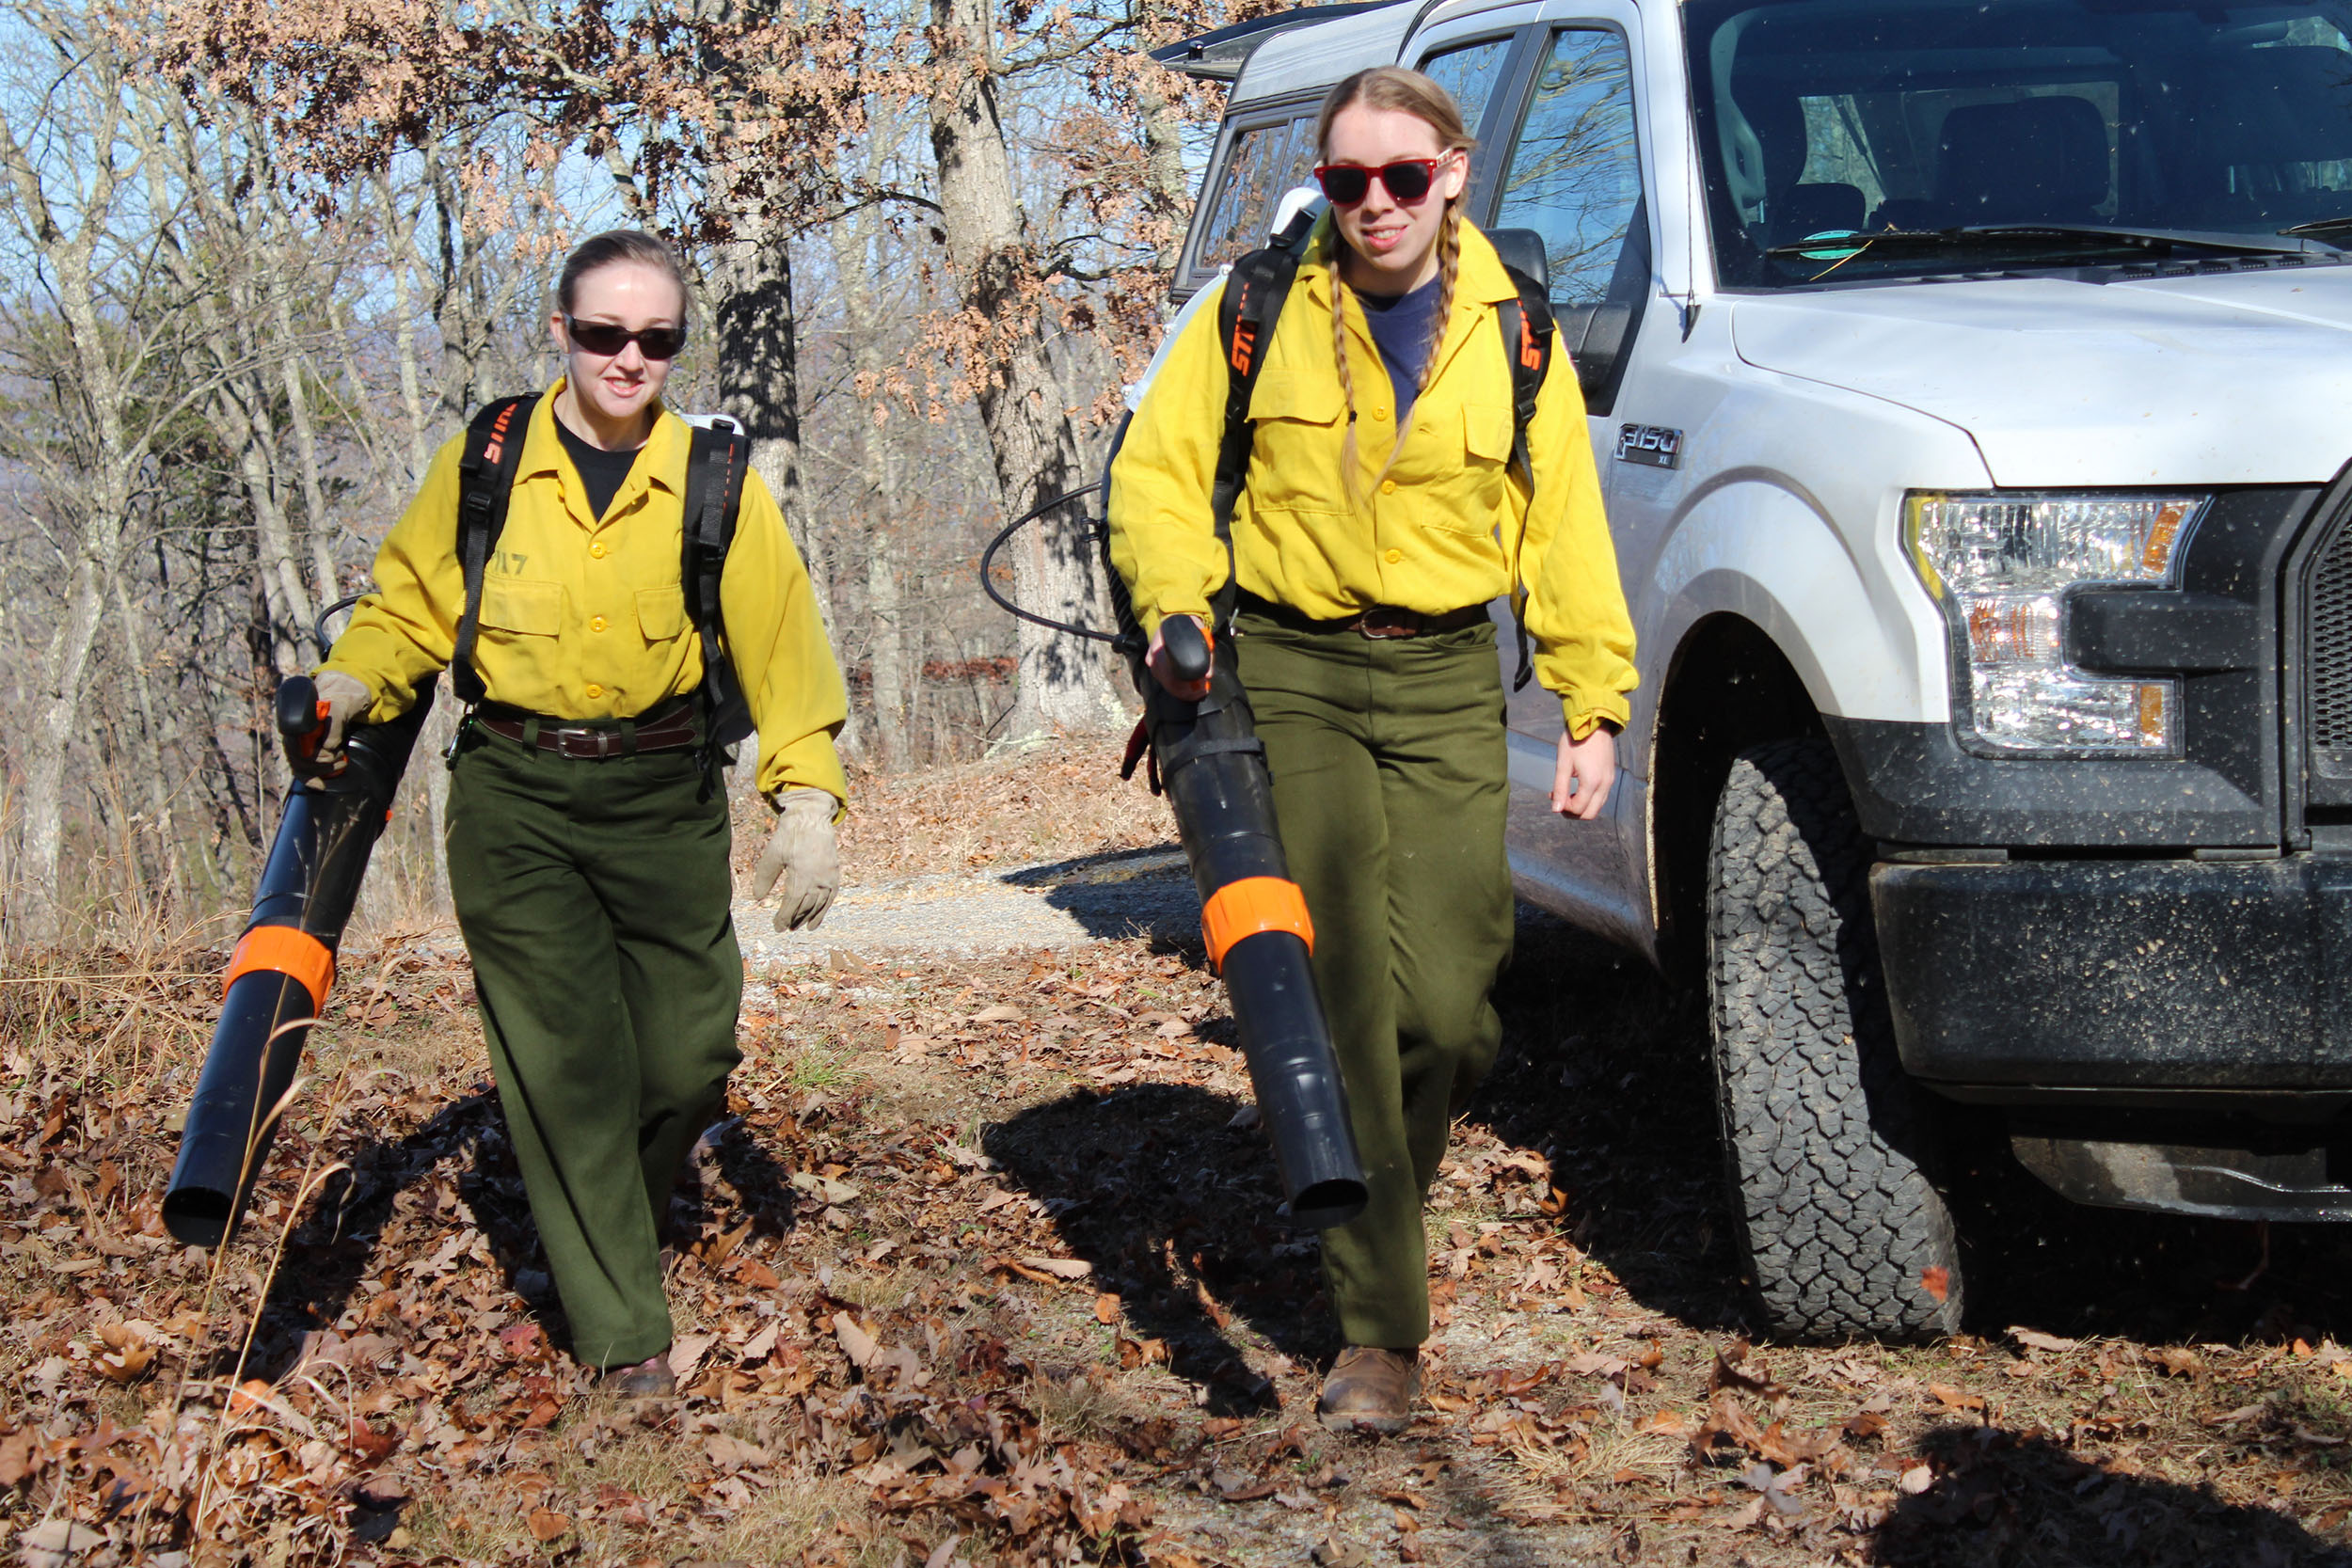 Students Molly Hunt (left) and Emily Newcombe use leaf blowers to clear the fire line of any loose debris in advance of the prescribed burn